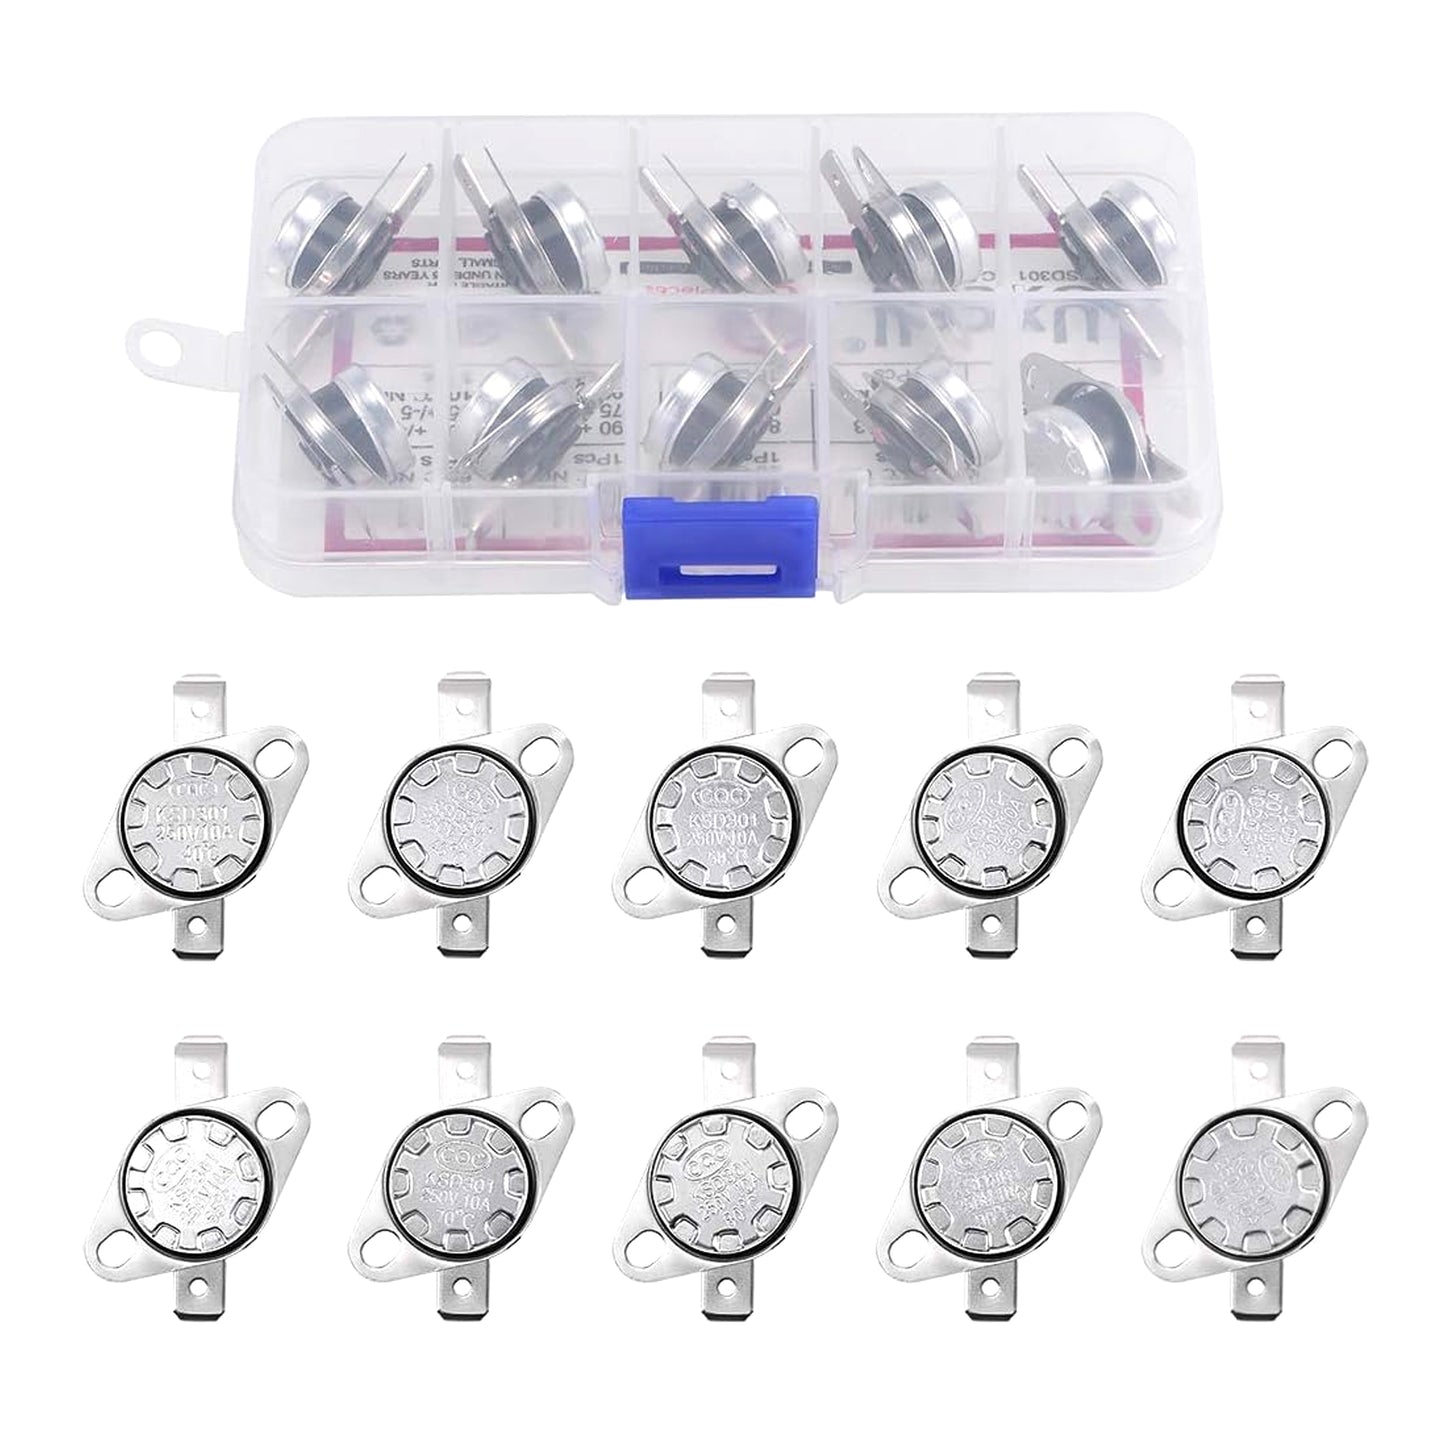 KSD301 Thermostat 40-100°C(104-212°F) Temperature Thermal Control Switch 40 45 50 55 60 65 70 80 90 100°C Normally Open Assortment Kit Thermostat Assortment Kit - RS2806 - REES52